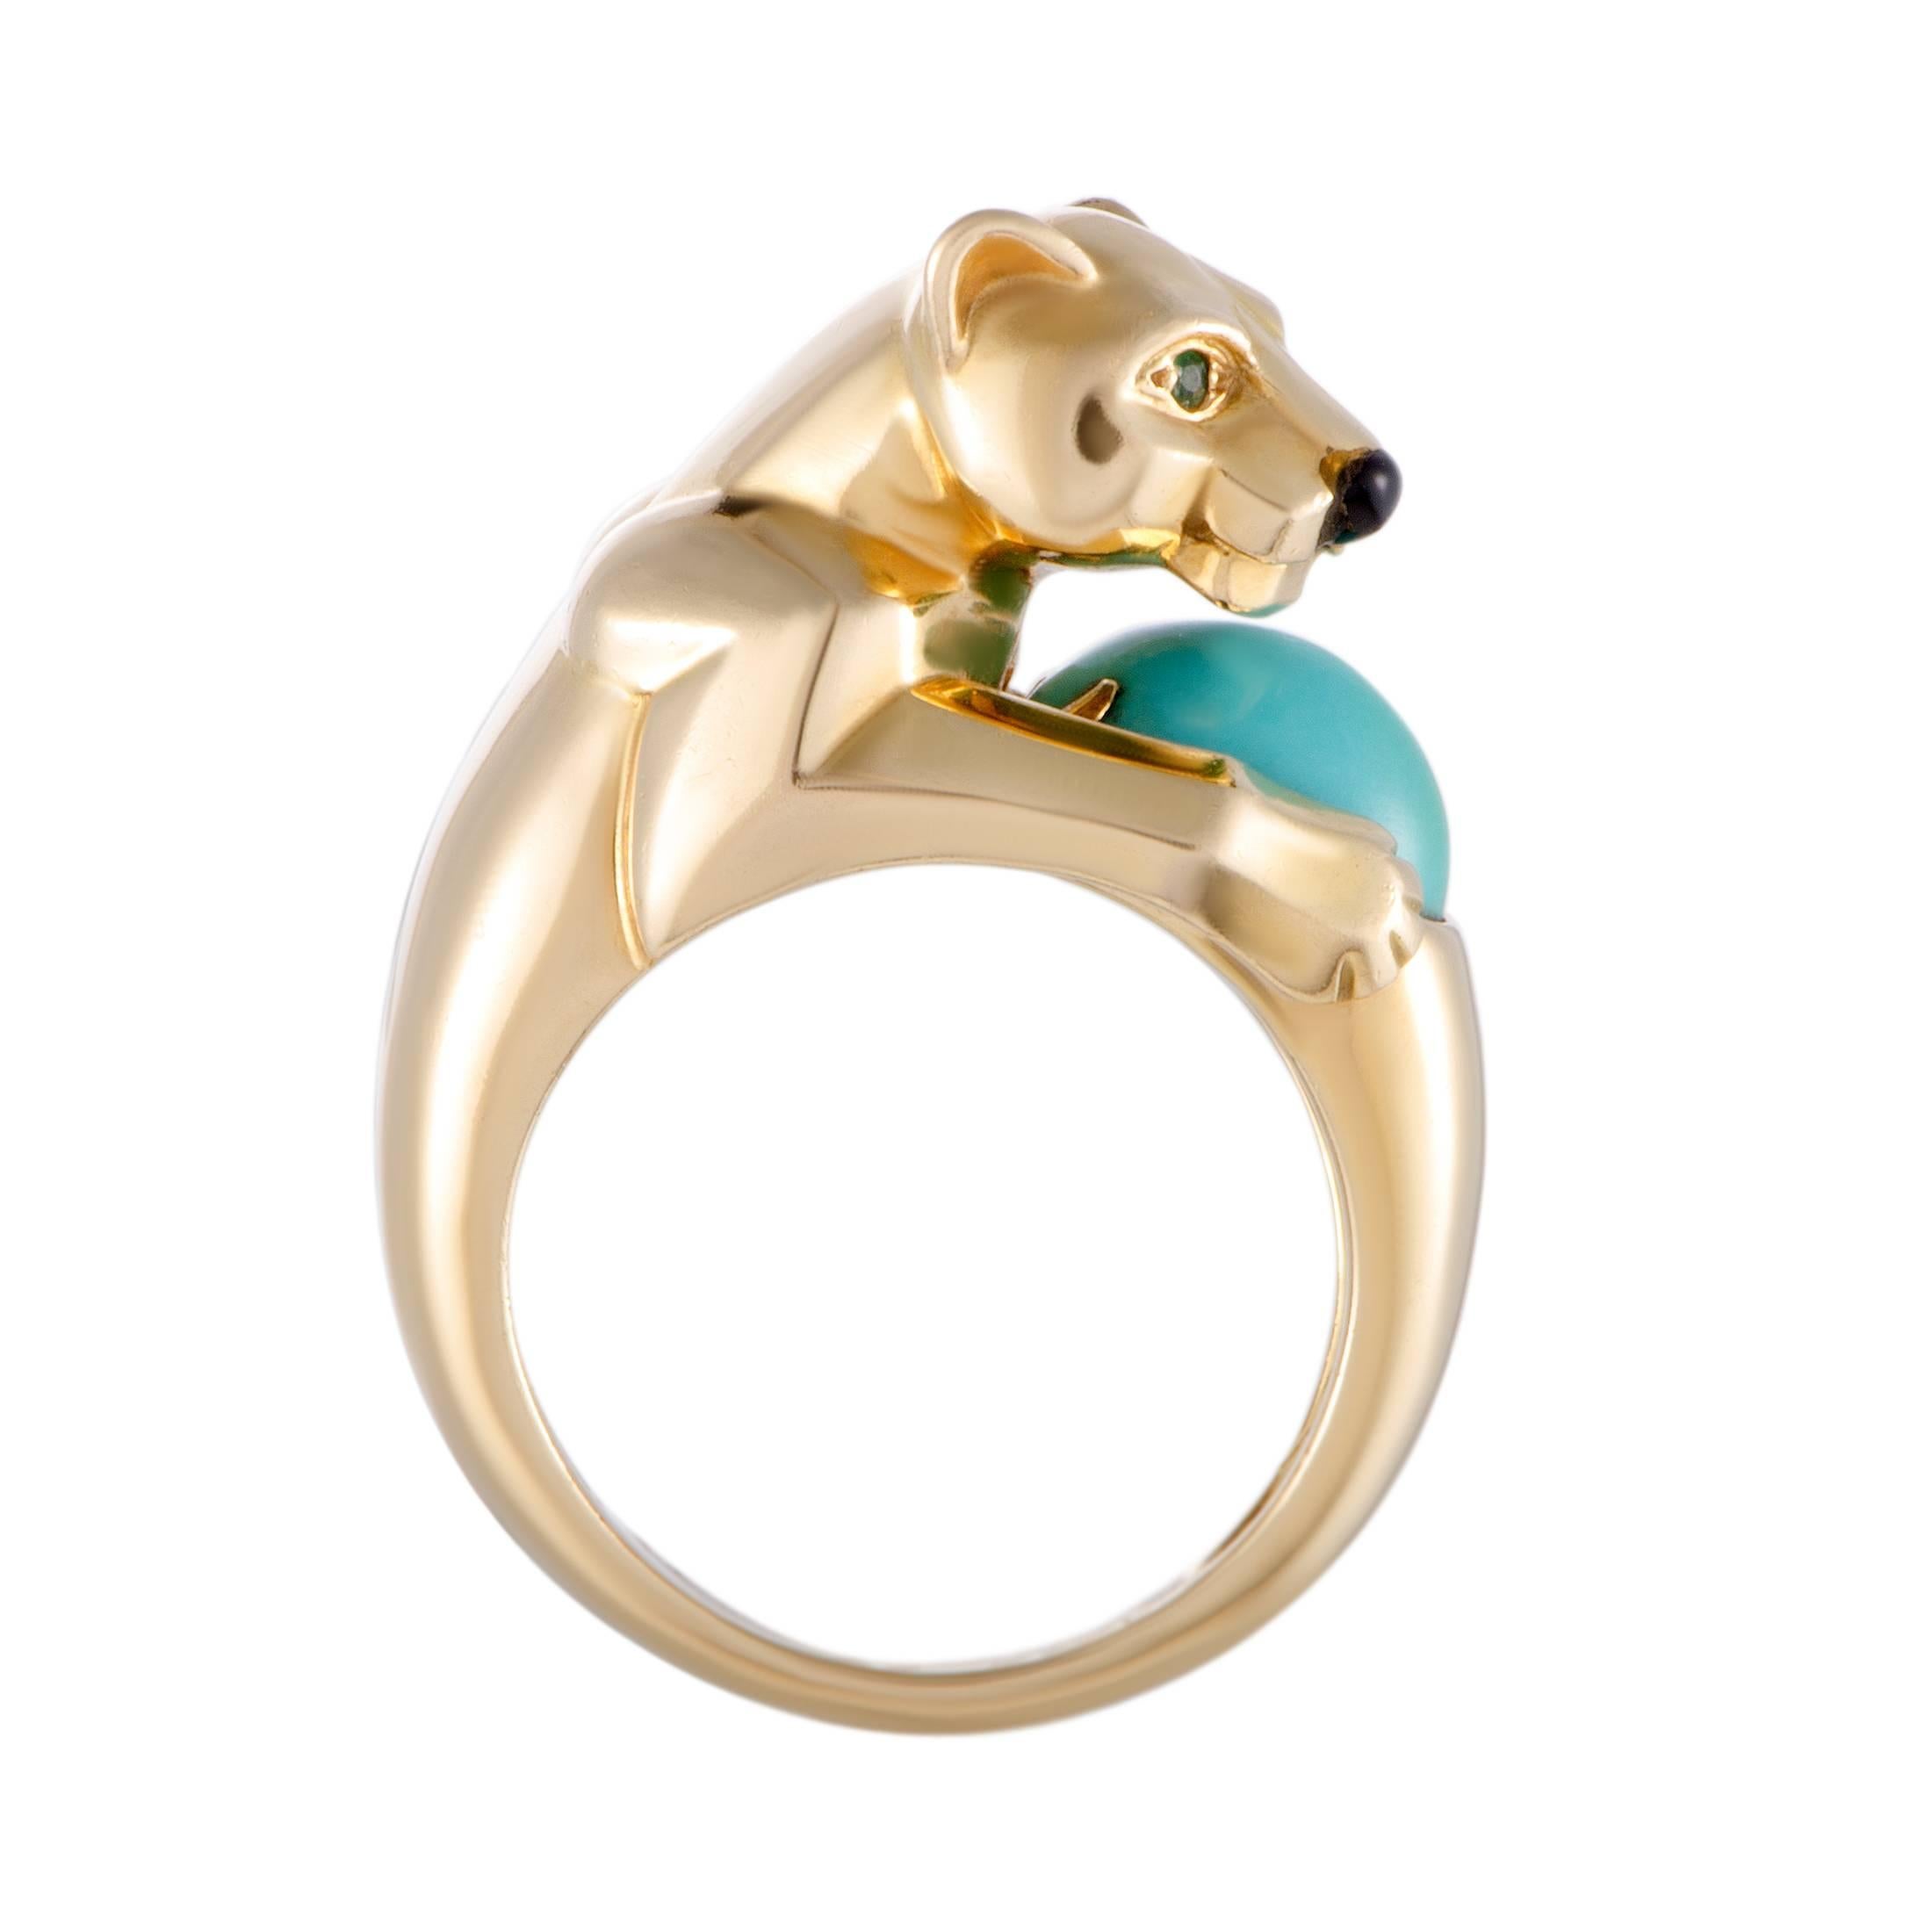 This vintage piece from Cartier boasts an irresistibly ingenious design and exceptional craftsmanship quality, offering an incredibly attractive appearance. The ring is made of luxurious 18K yellow gold and decorated with turquoise, onyx, and